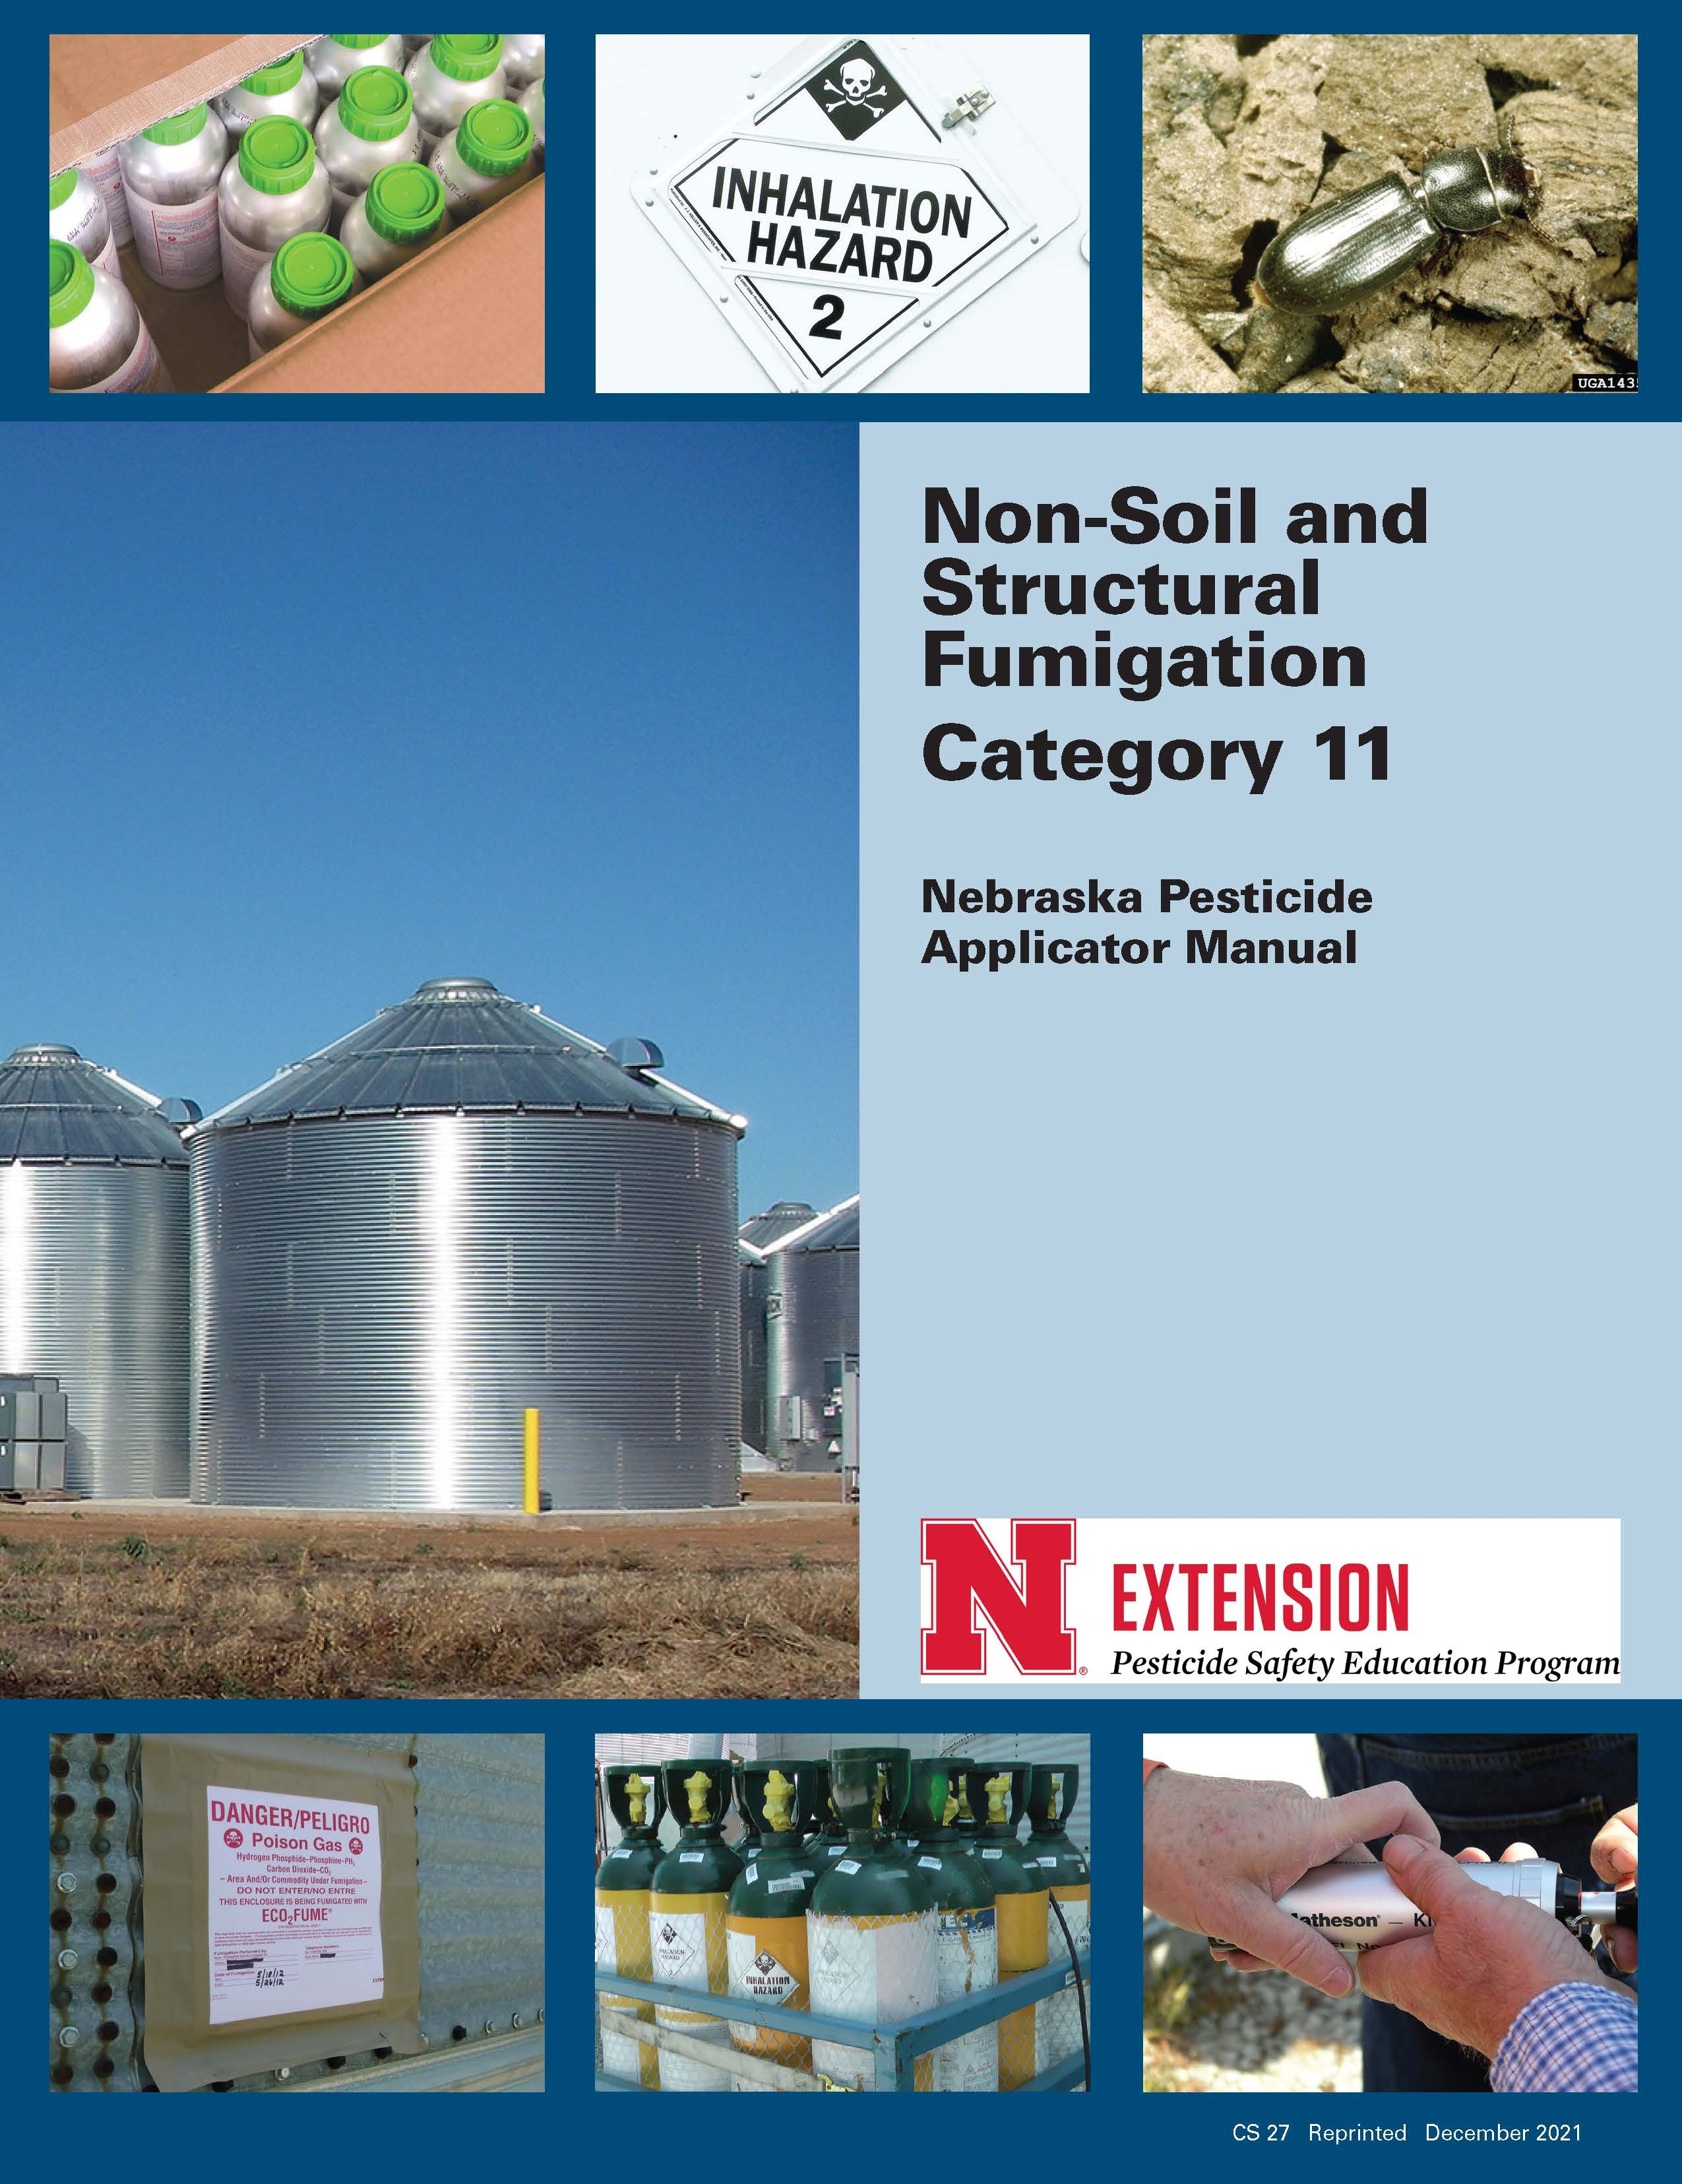 Non Soil and Structual Fumigation (11) Manual